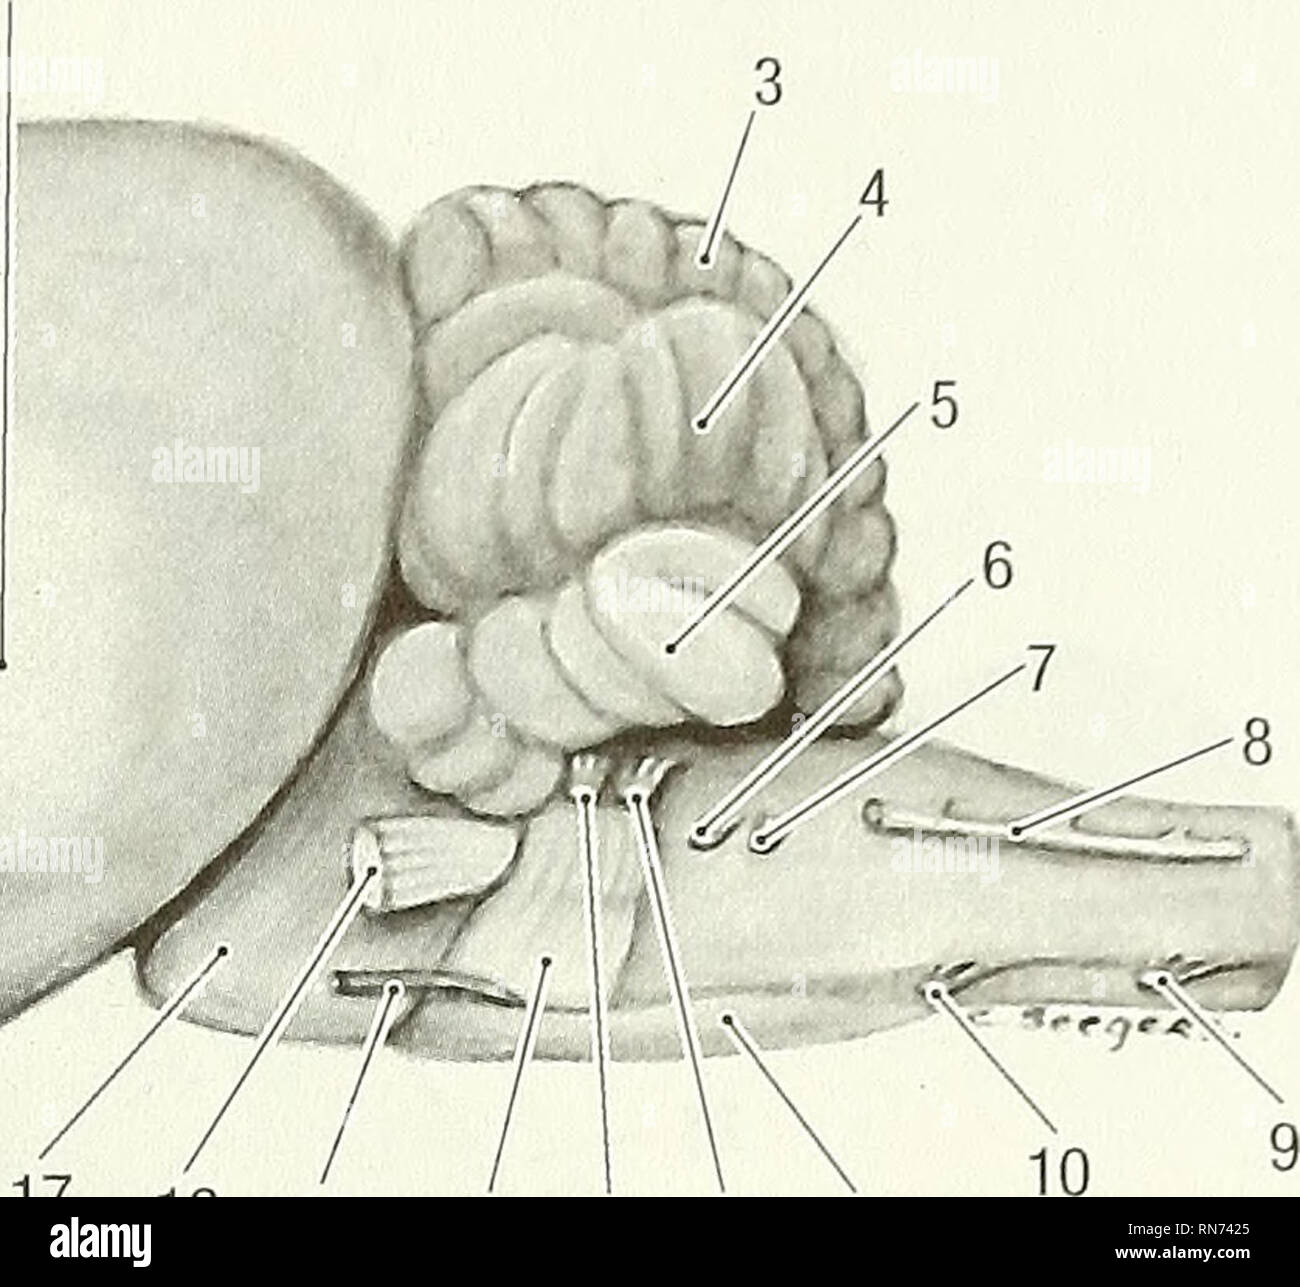 . Anatomy of the woodchuck (Marmota monax). Woodchuck; Mammals. 17 16 15 14 13 12 11 Fig. 10-2. Brain, lateral view. 1 Pseudosylvian fissure, 2 temporal lobe, 3 vermis, 4 cerebellar hemisphere, 5 parafloccular lobe, 6 glossopharyngeal n., 7 vagus n., 8 accessory n., 9 first cervical spinal n., 10 hypoglossal n., 11 myelencephalon, 12 vestibulocochlear n., 13 facial n., 14 pons, 15 abducent n., 16 trigeminal n., 17 mesencephalon, 18 piriform lobe, 19 optic n., 20 lateral olfactory tract, 21 lateral olfactory groove, 22 olfactory bulb. separated from the rest of the cerebral hemisphere by a dist Stock Photo